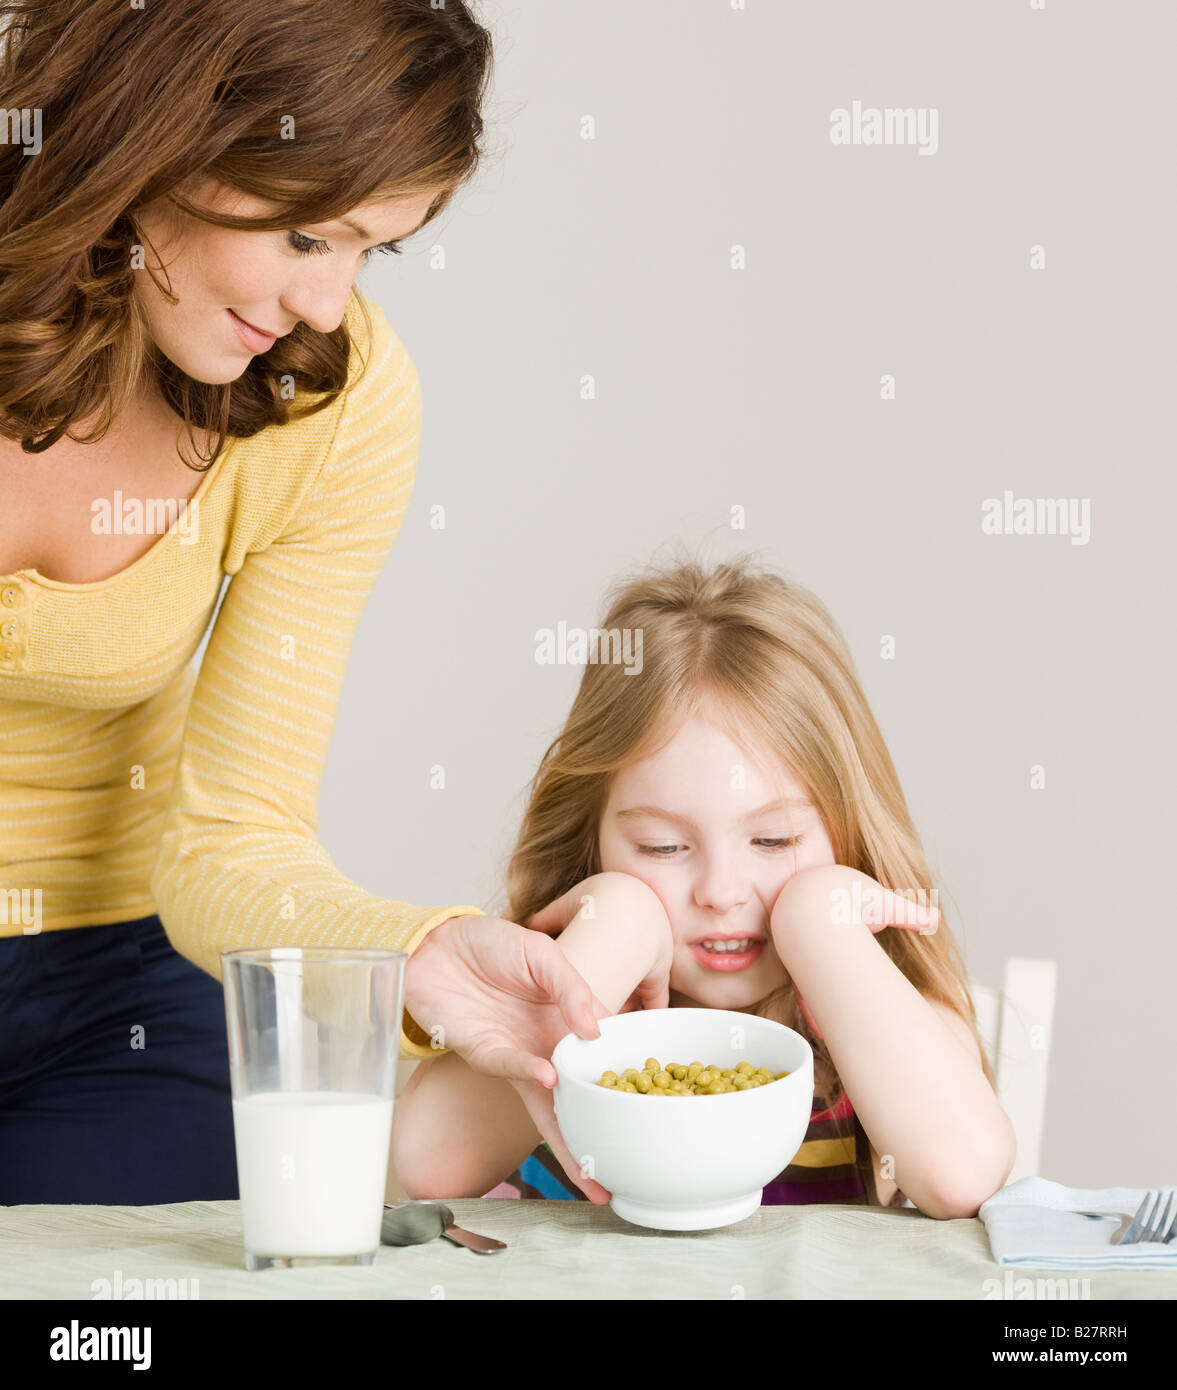 Mother serving vegetables to daughter Stock Photo